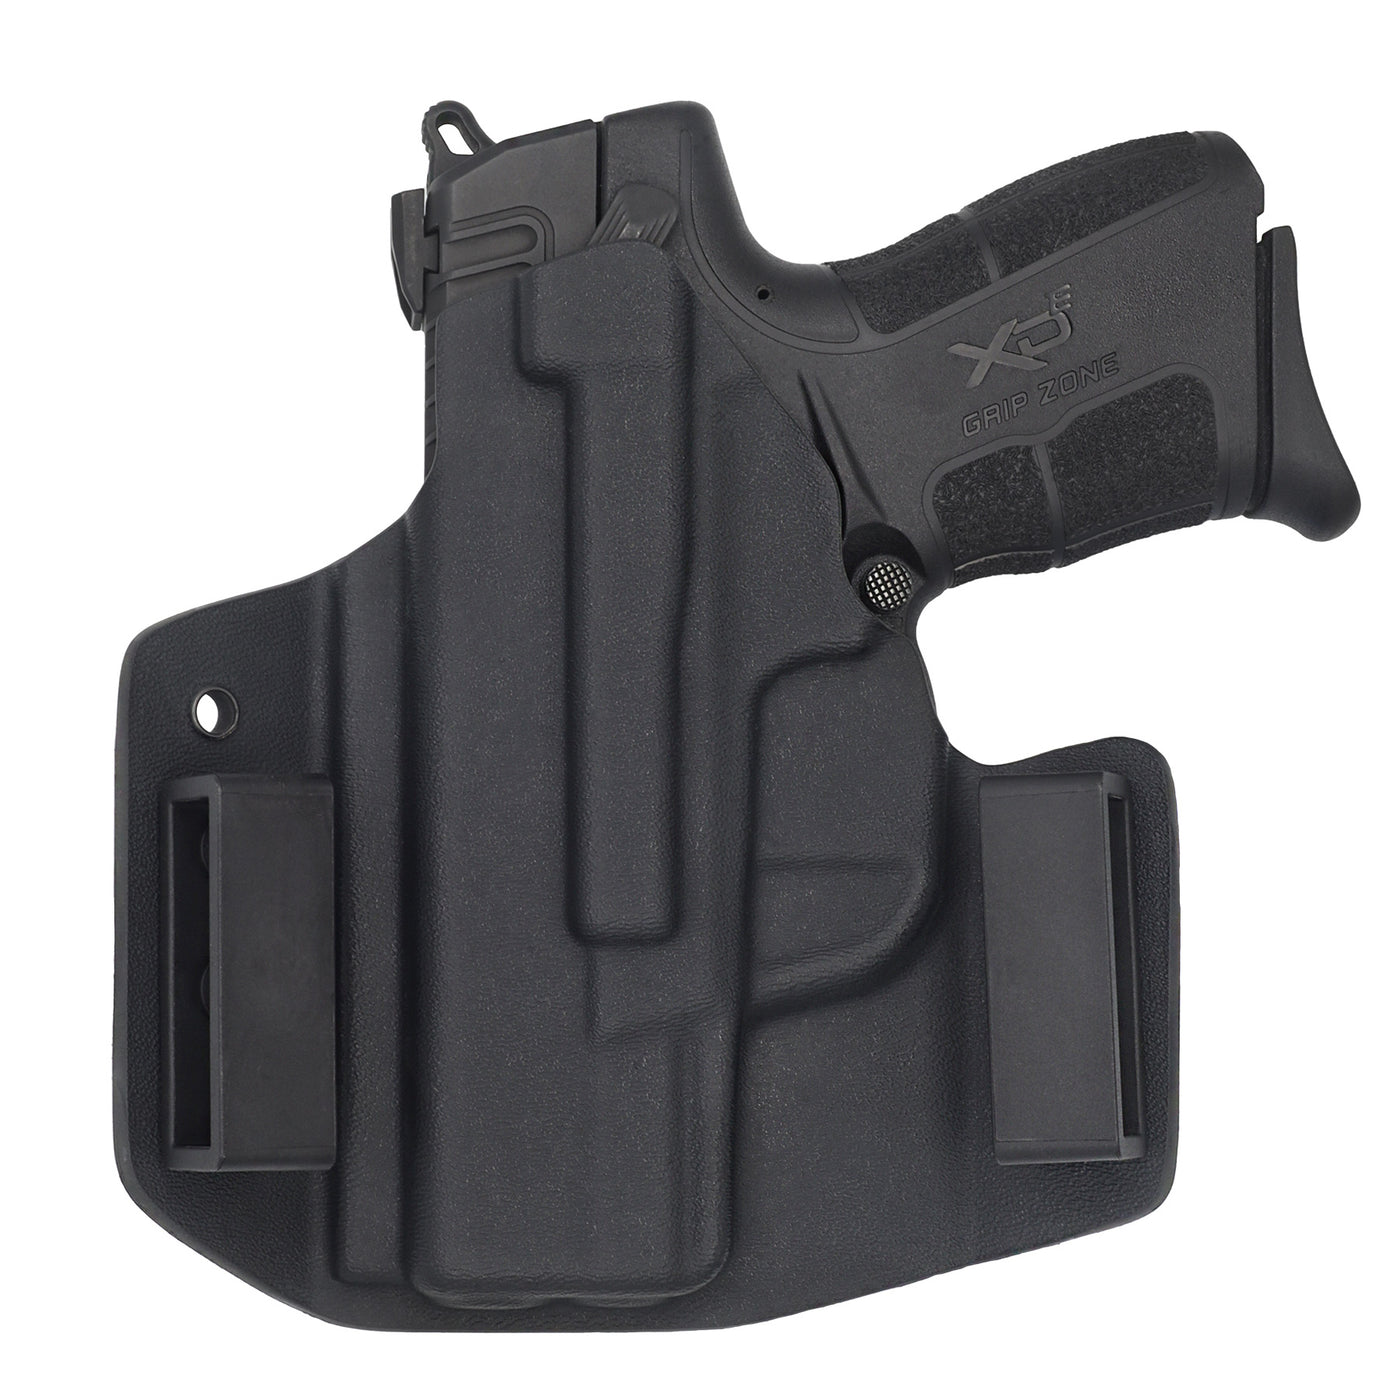 C&G Holsters quickship OWB Covert Springfield XDe 3.3" in holstered position back view